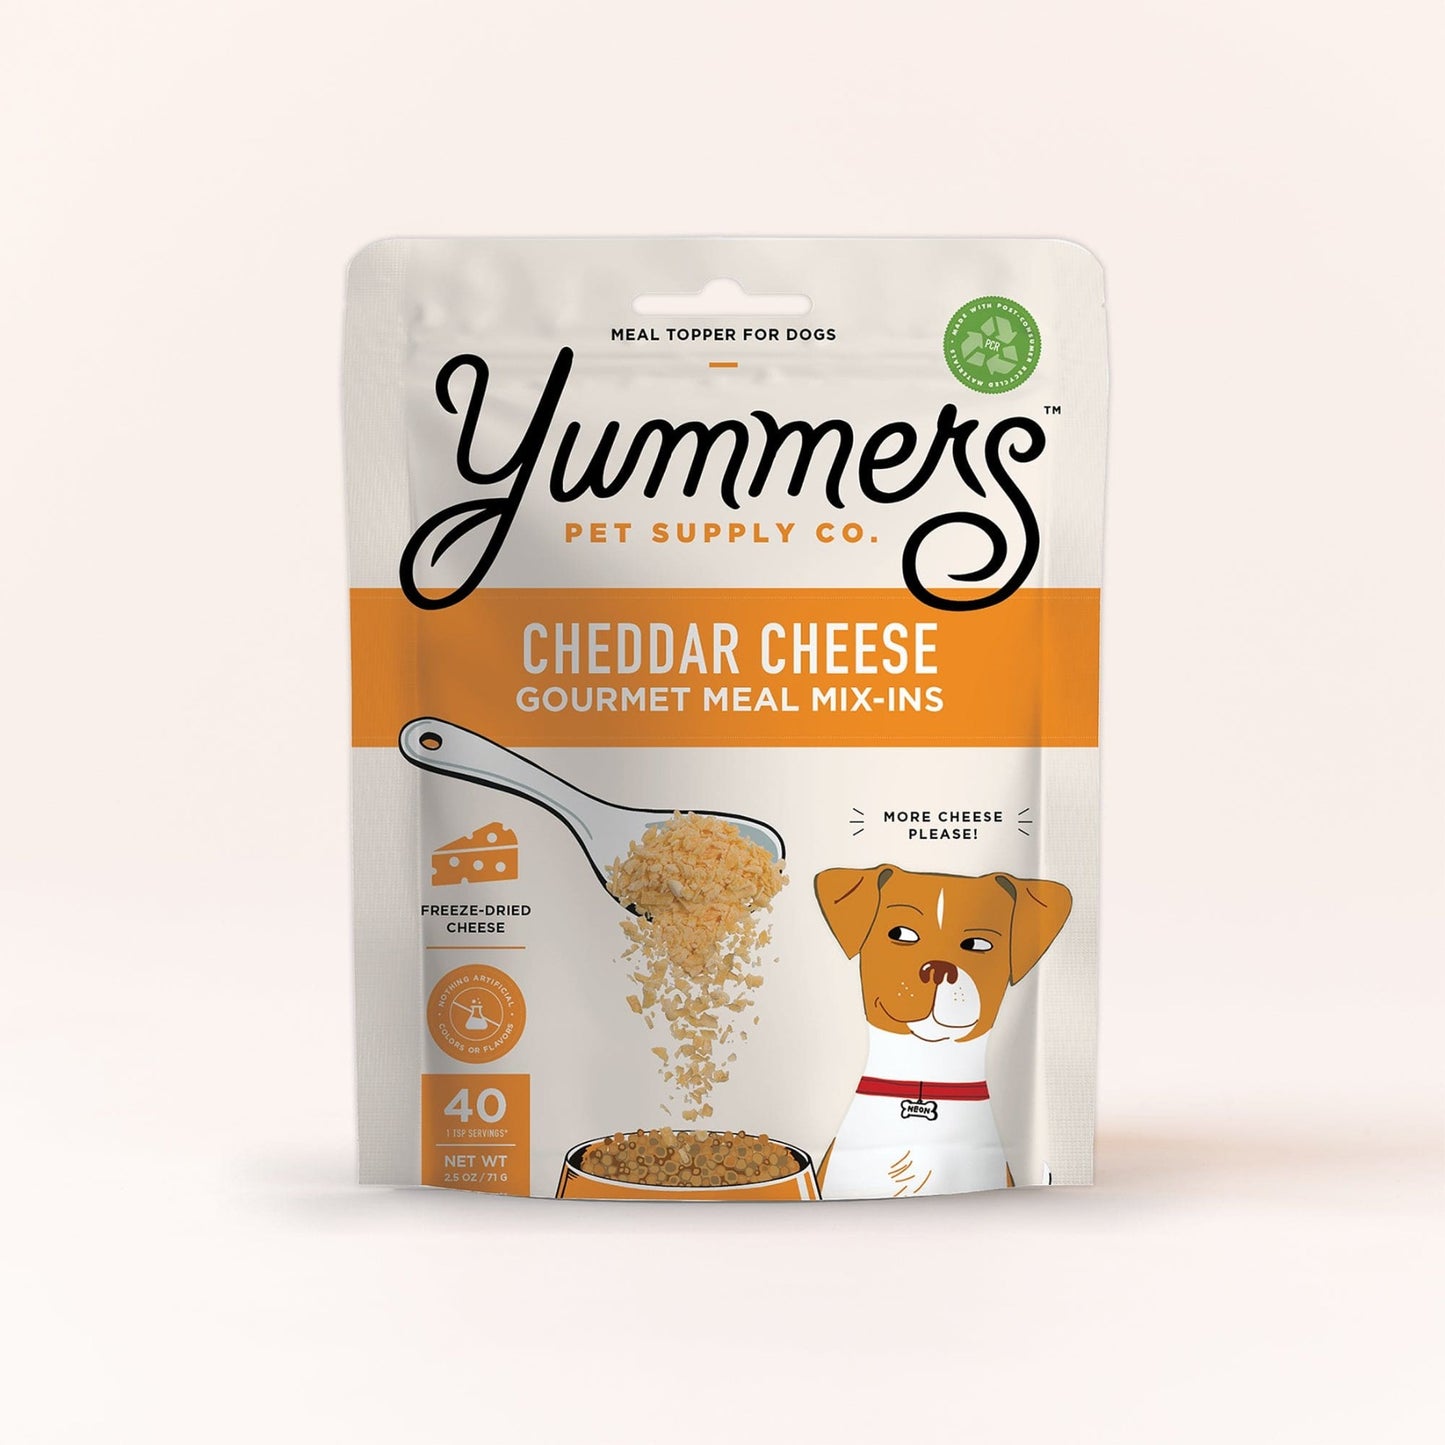 Yummers Freeze-dried Cheddar Cheese